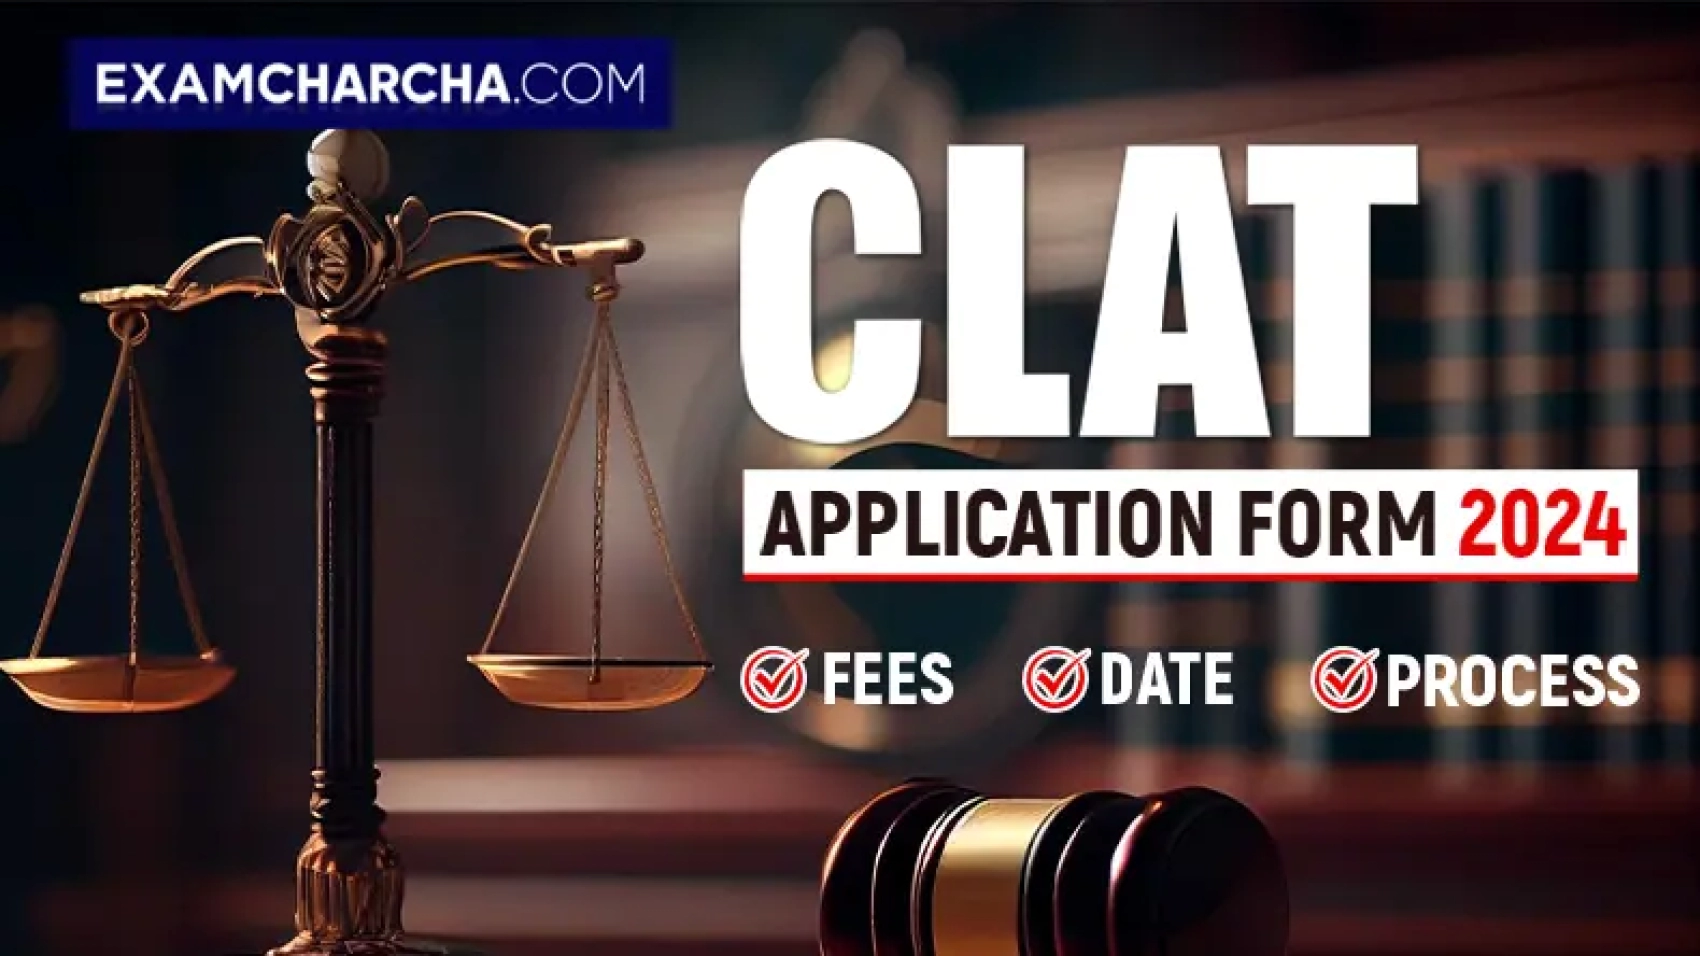 CLAT Application Form 2024 Fees, Process, Date & Eligibility